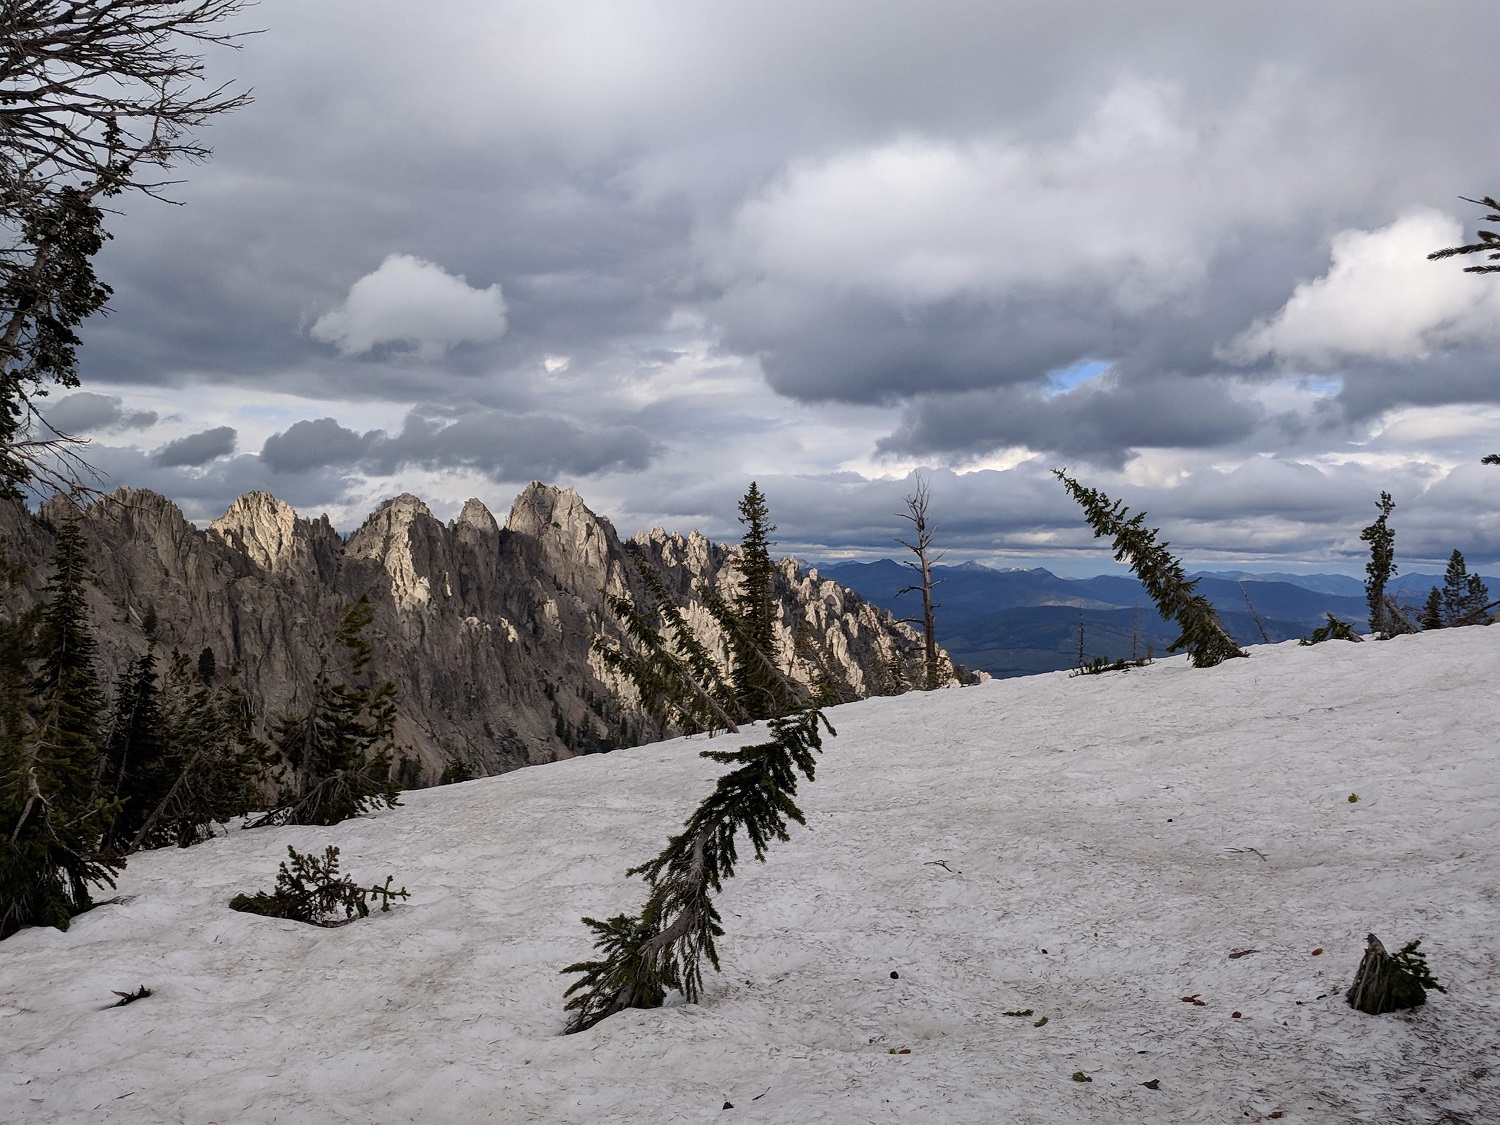 Crags, clouds, and snow